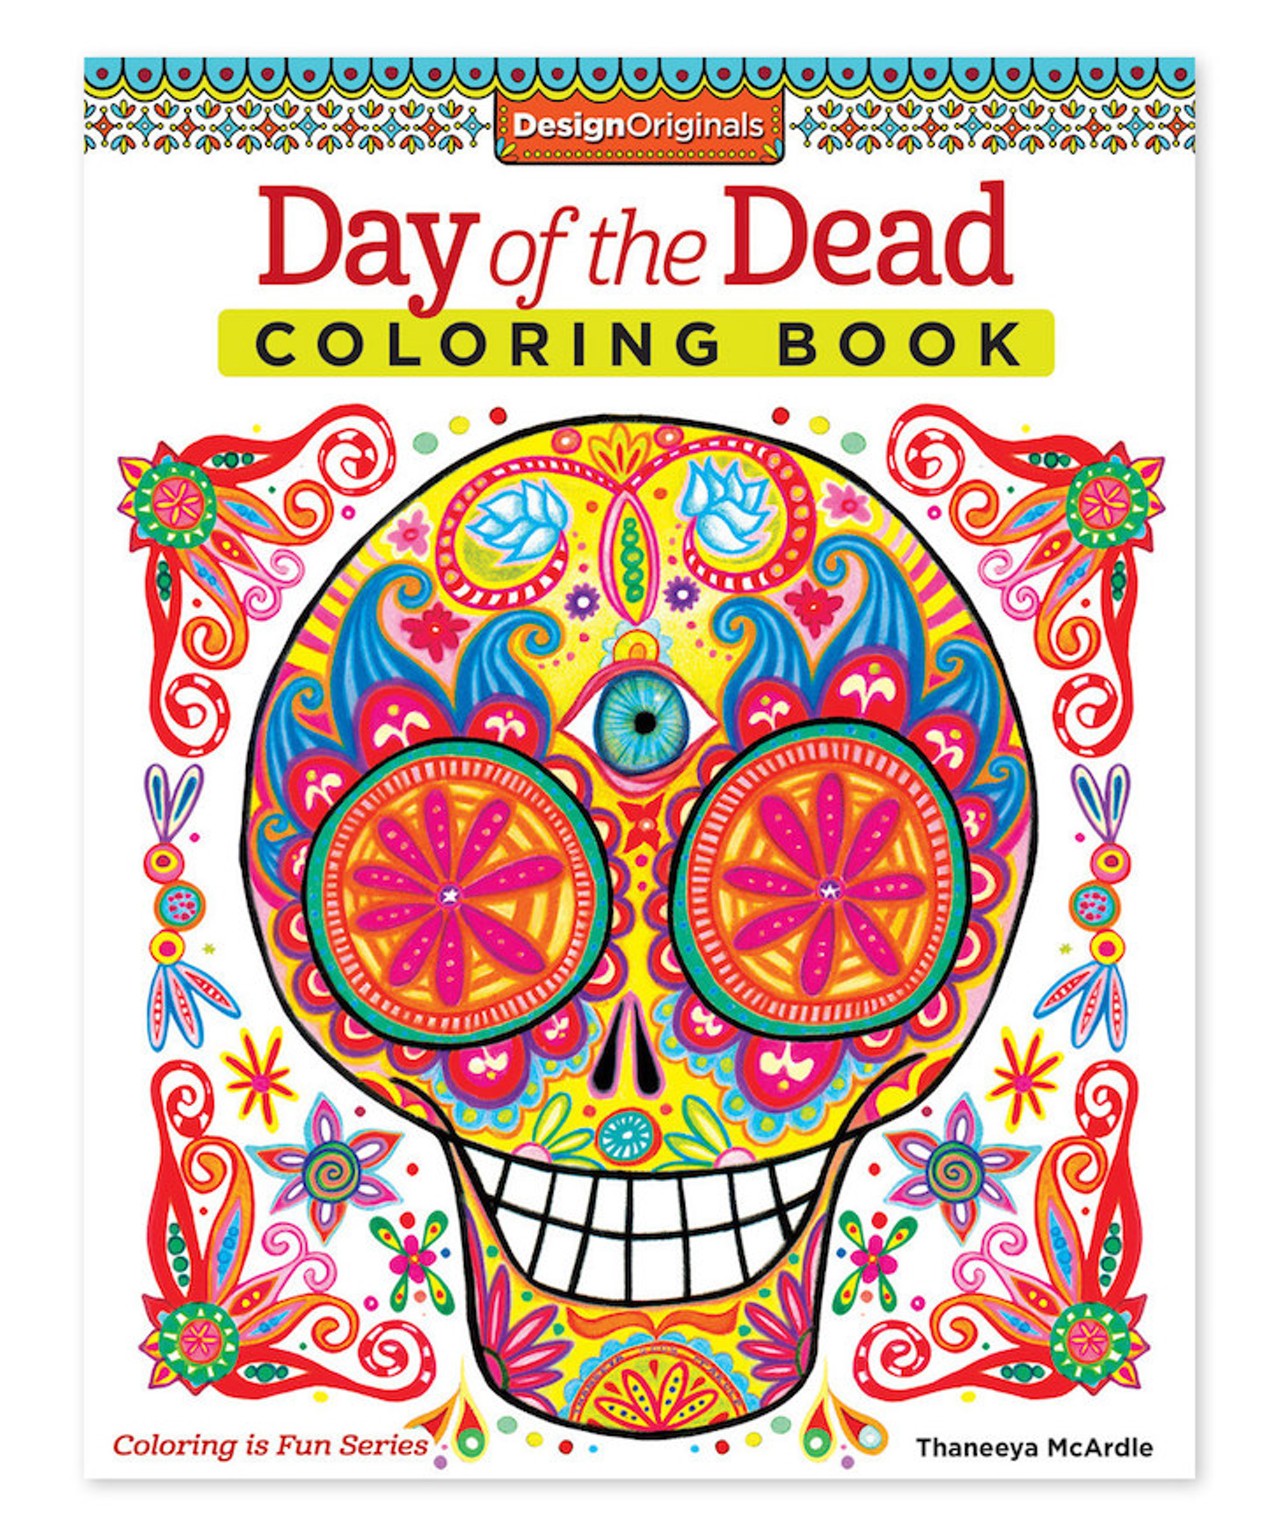  Day of the Dead Coloring Book
Calaveras basically beg to be colored in.
Buy it at walmart.com 